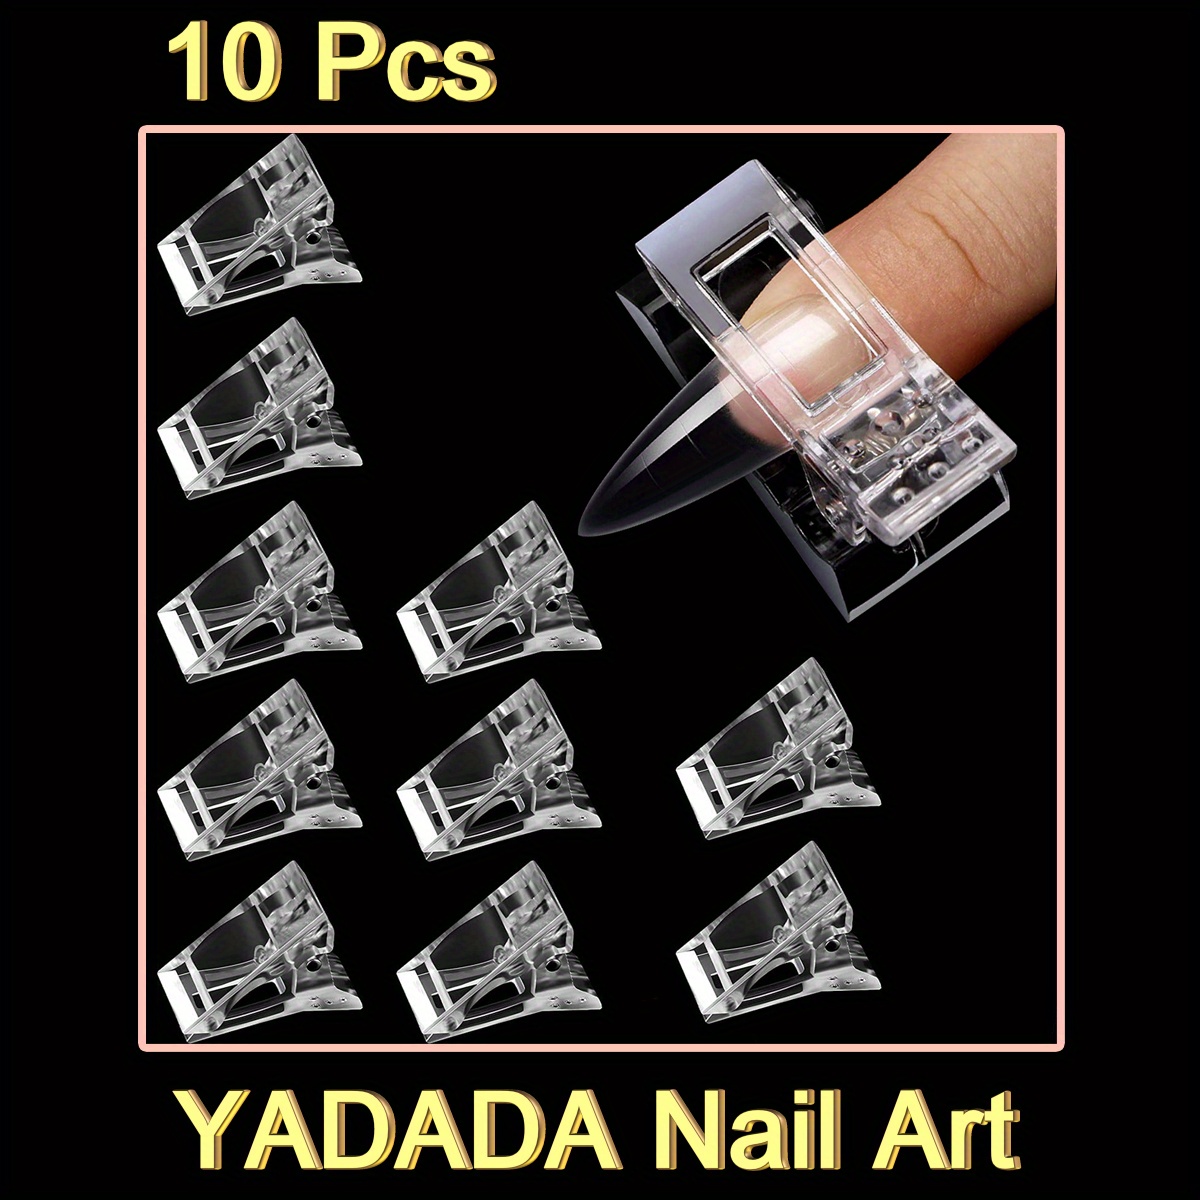 Dockapa Nail Tips Clip for Quick Building Polygel Nail Forms Nail Clips for Polygel Finger Nail Extension UV LED Builder Clamps Manicure Nail Art Tool 1Pcs (